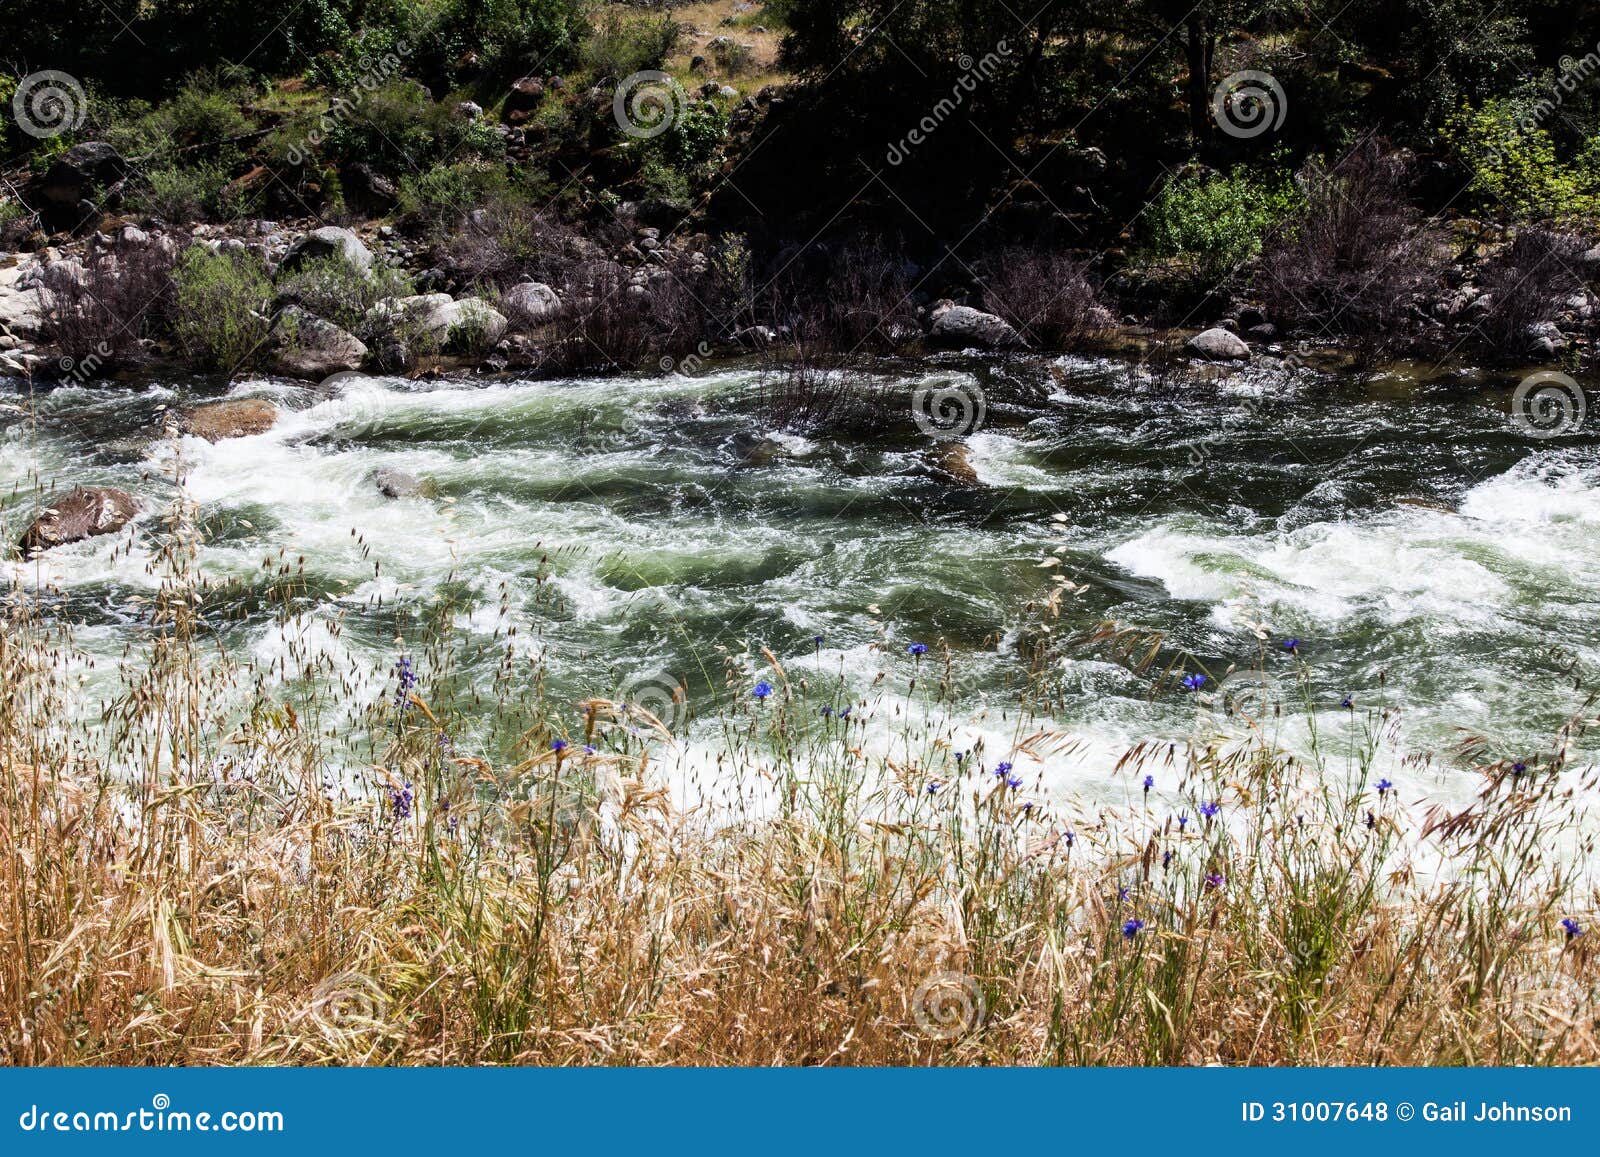 yosemite river and flowers